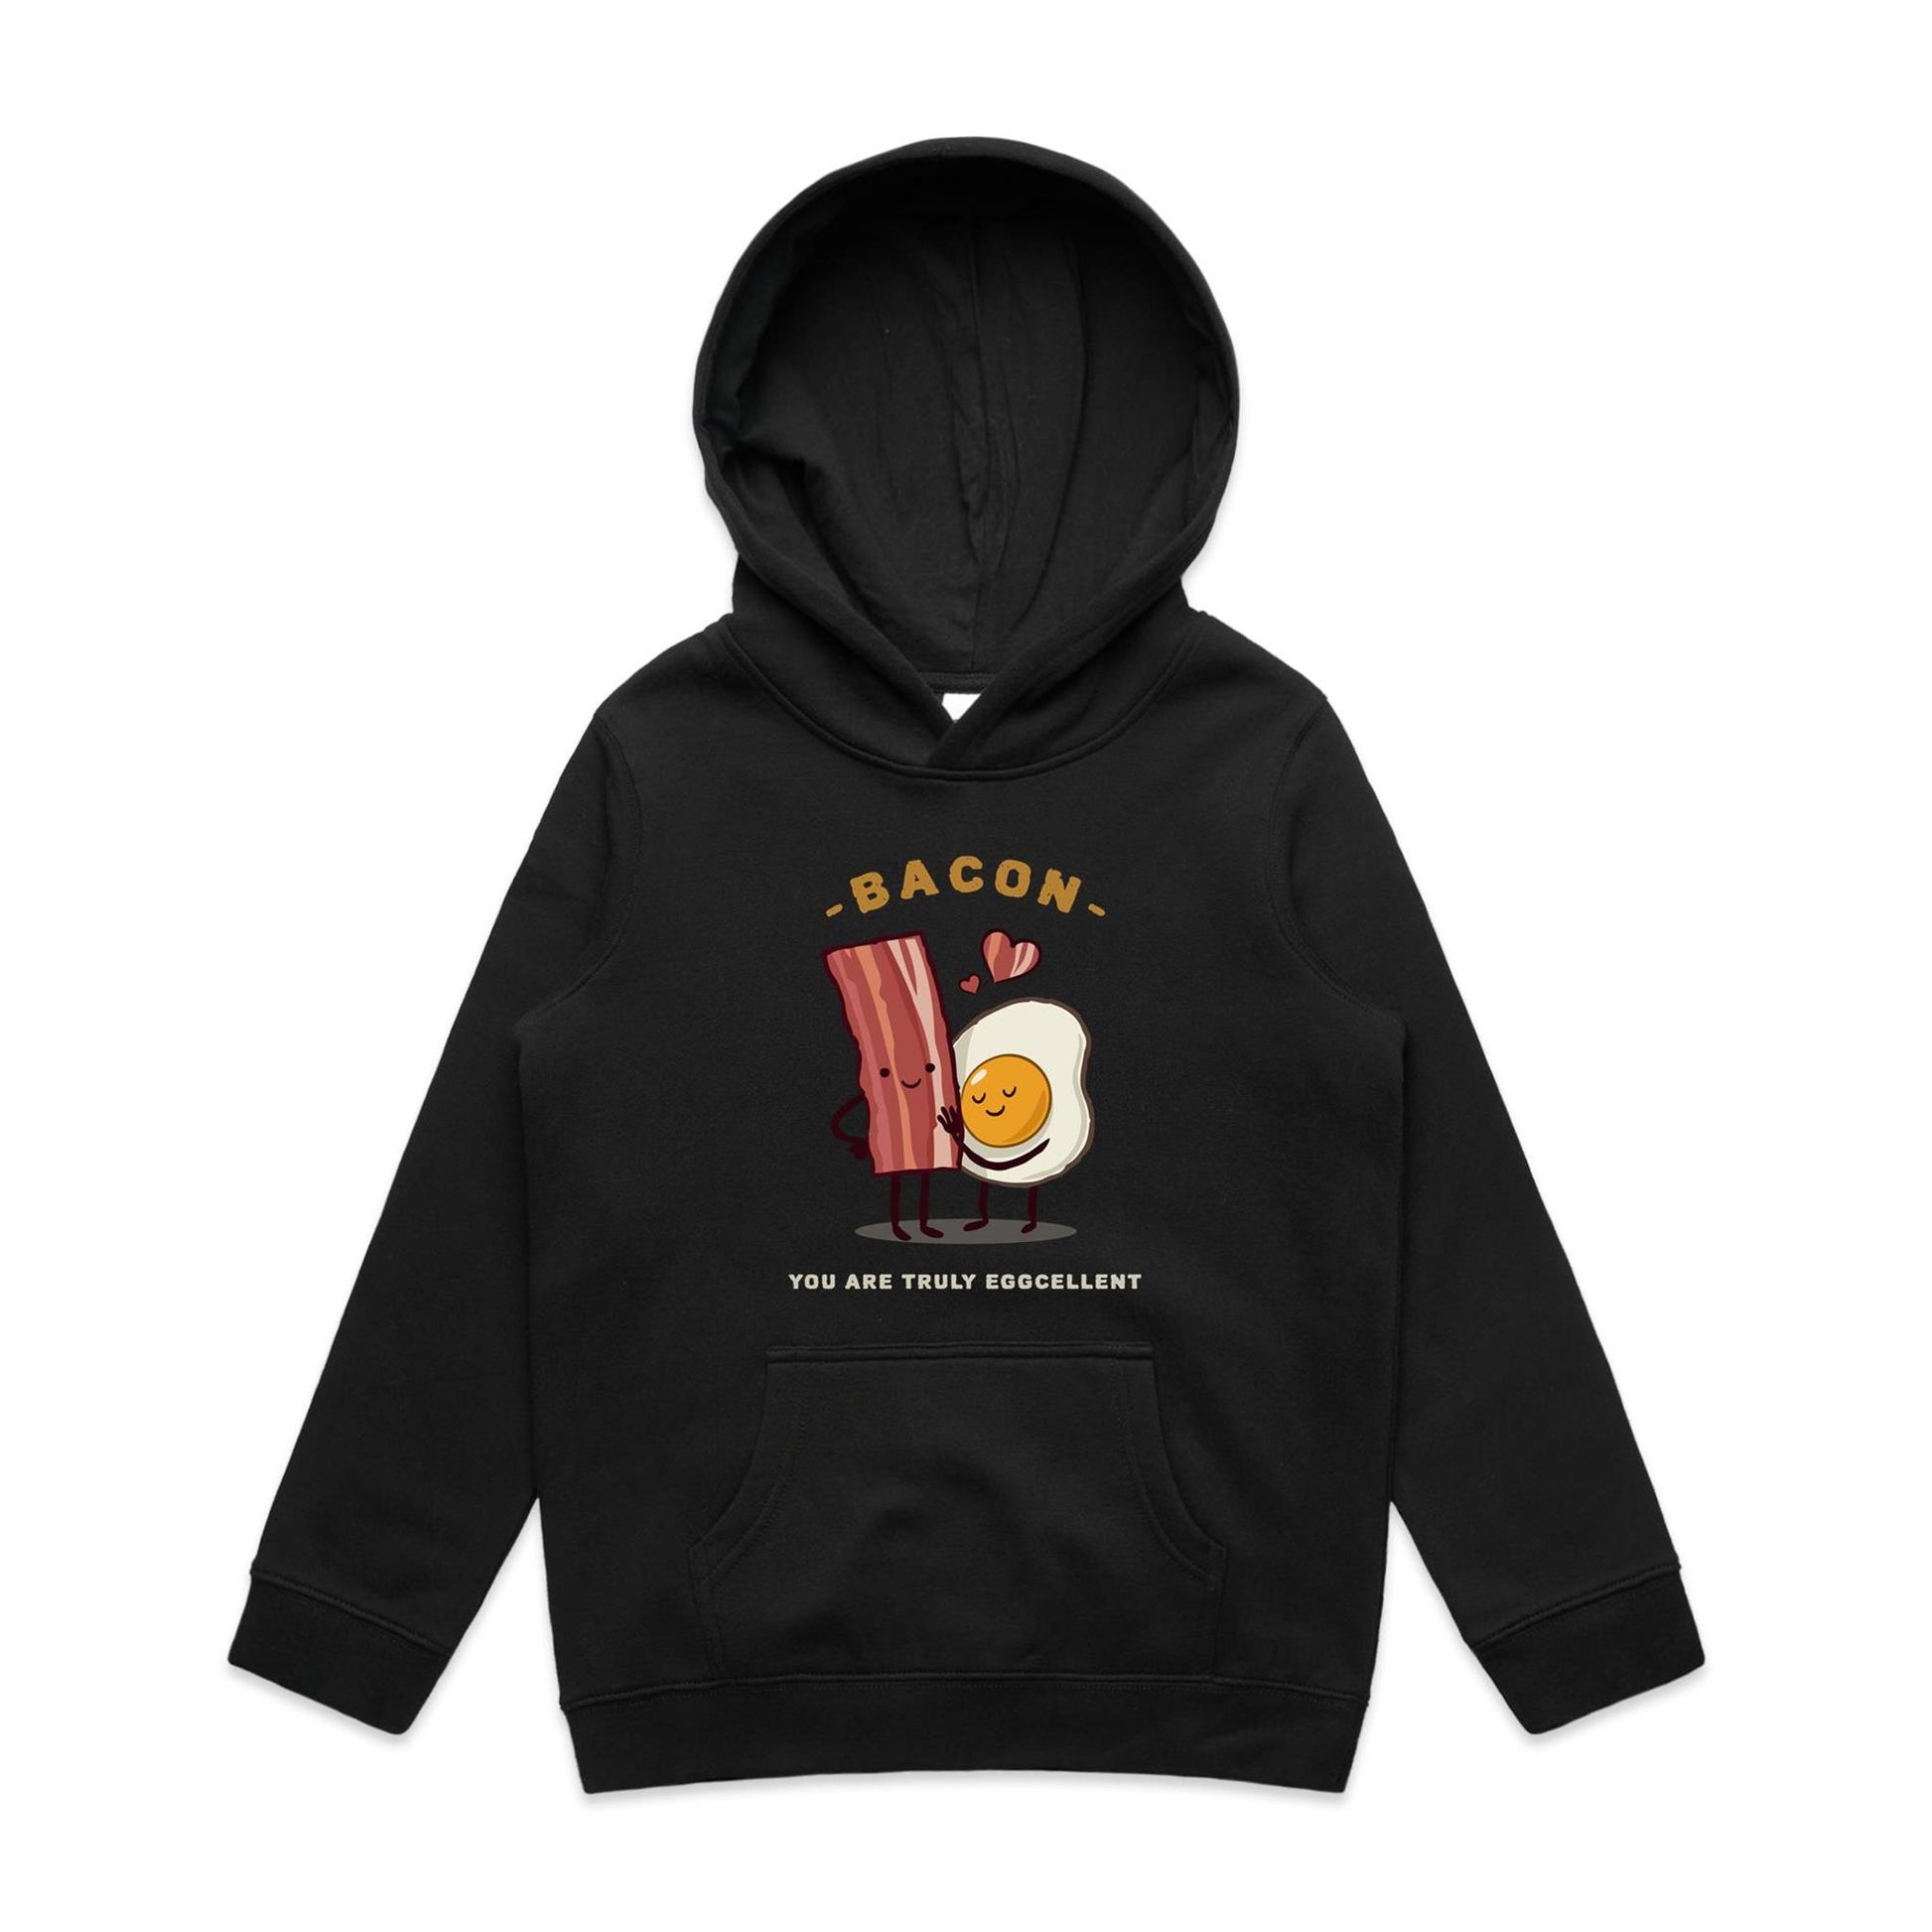 Bacon, You Are Truly Eggcellent - Youth Supply Hood Black Kids Hoodie Food